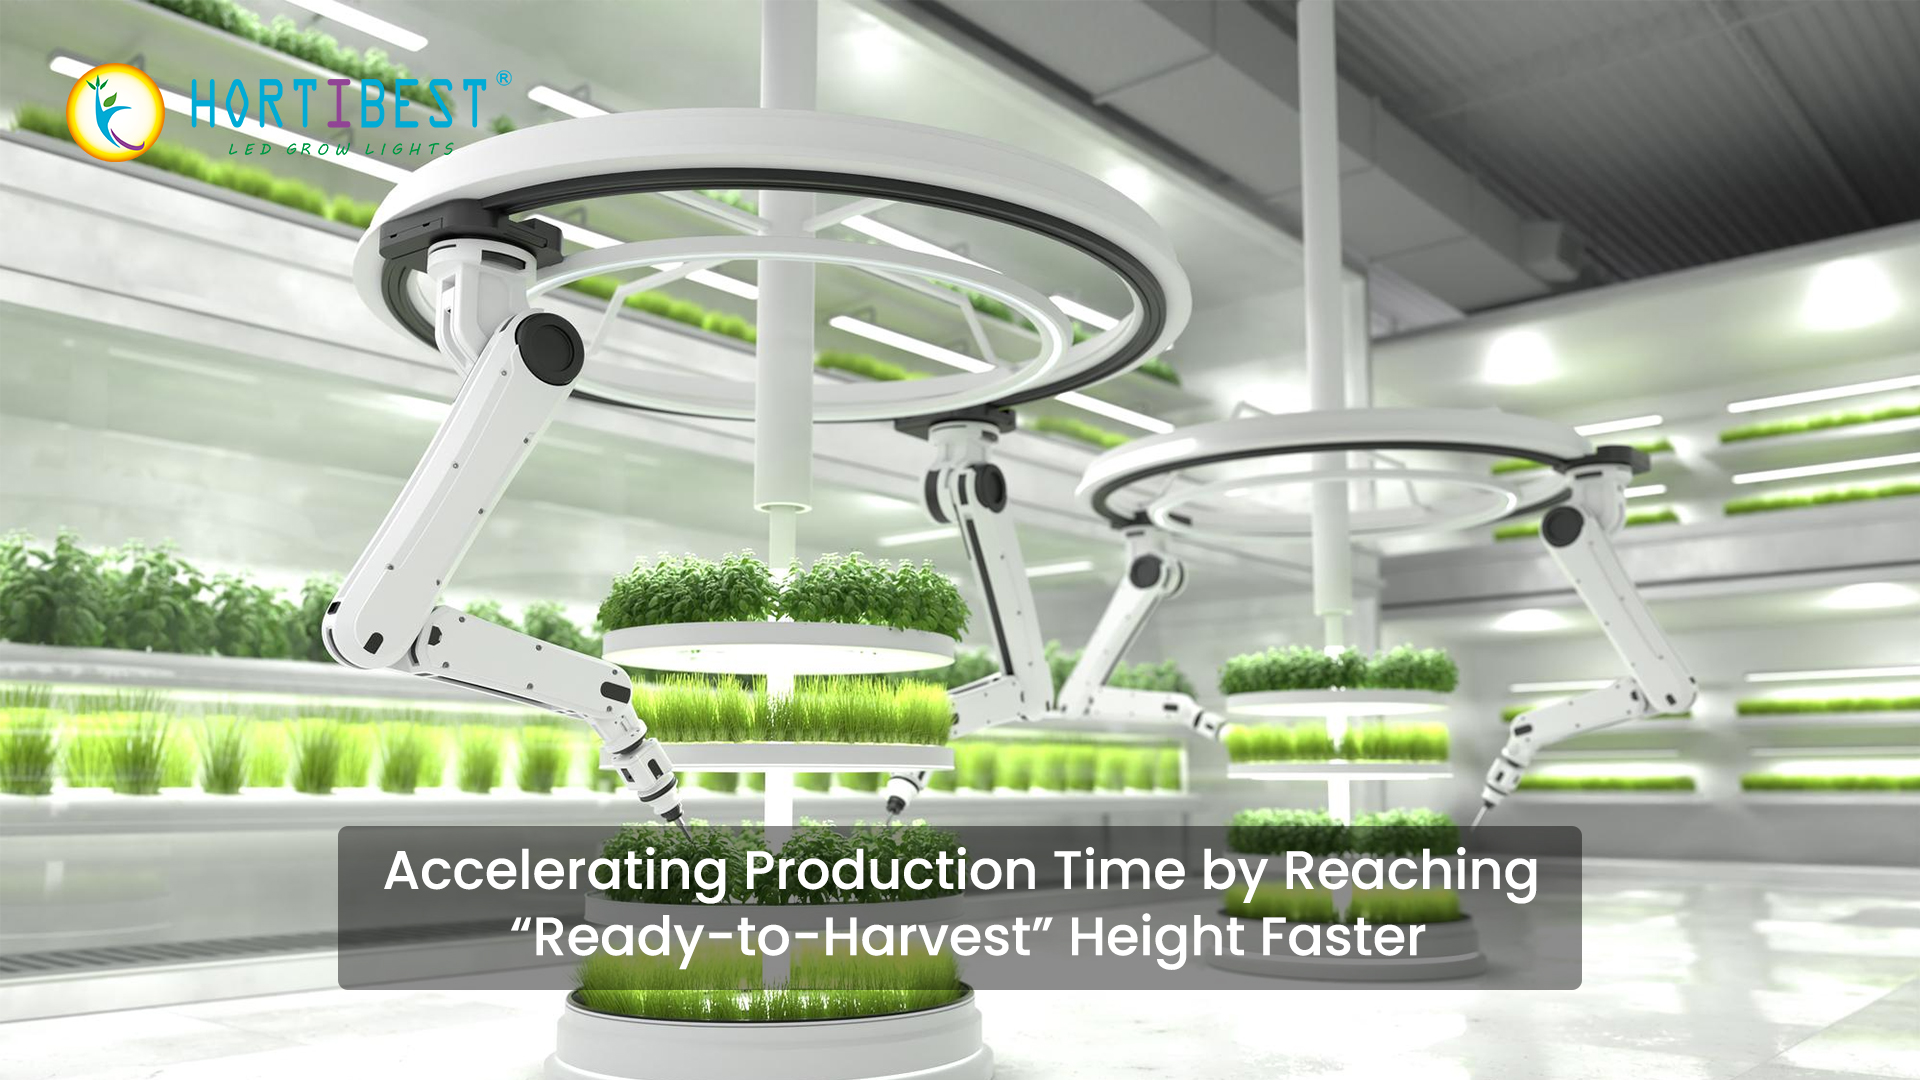 Accelerating Production Time by Reaching “Ready-to-Harvest” Height Faster